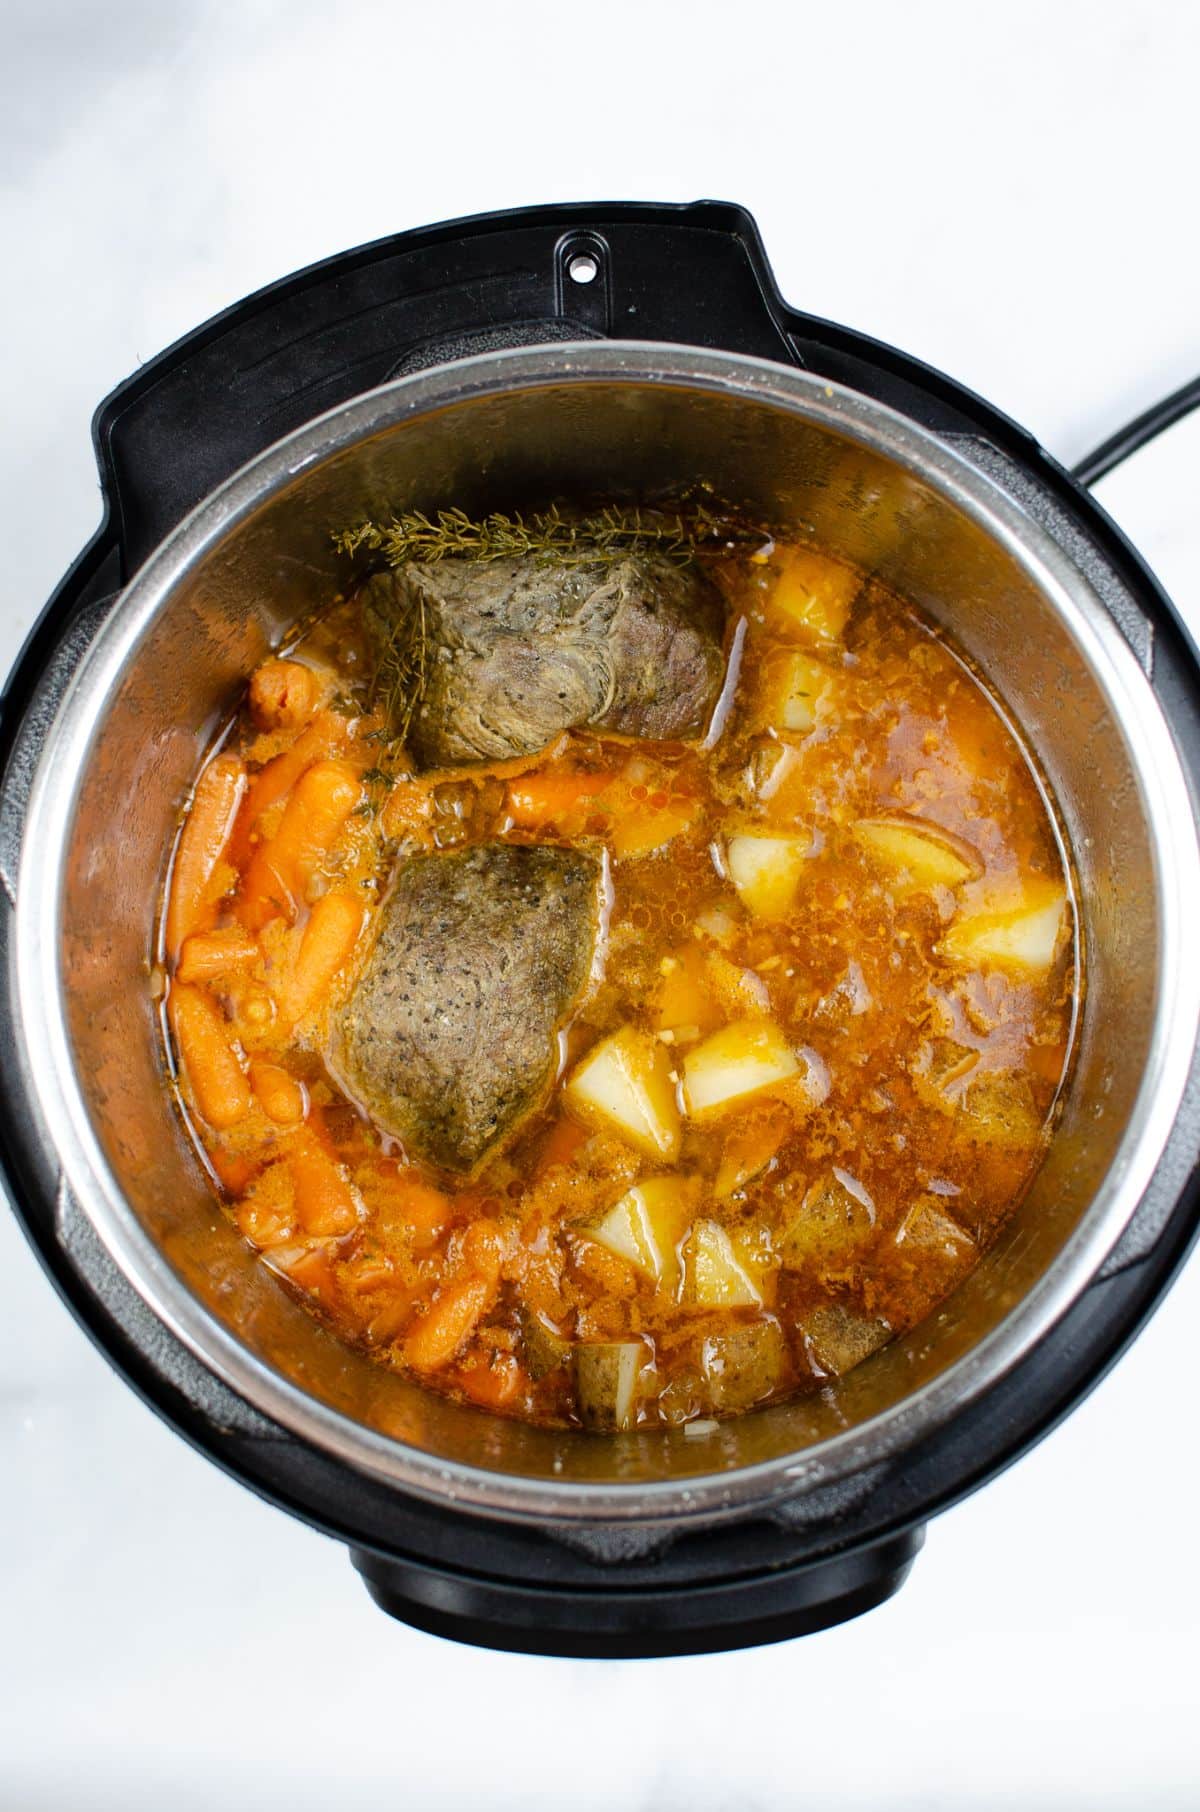 the meat and vegetables being cooked in the instant pot.